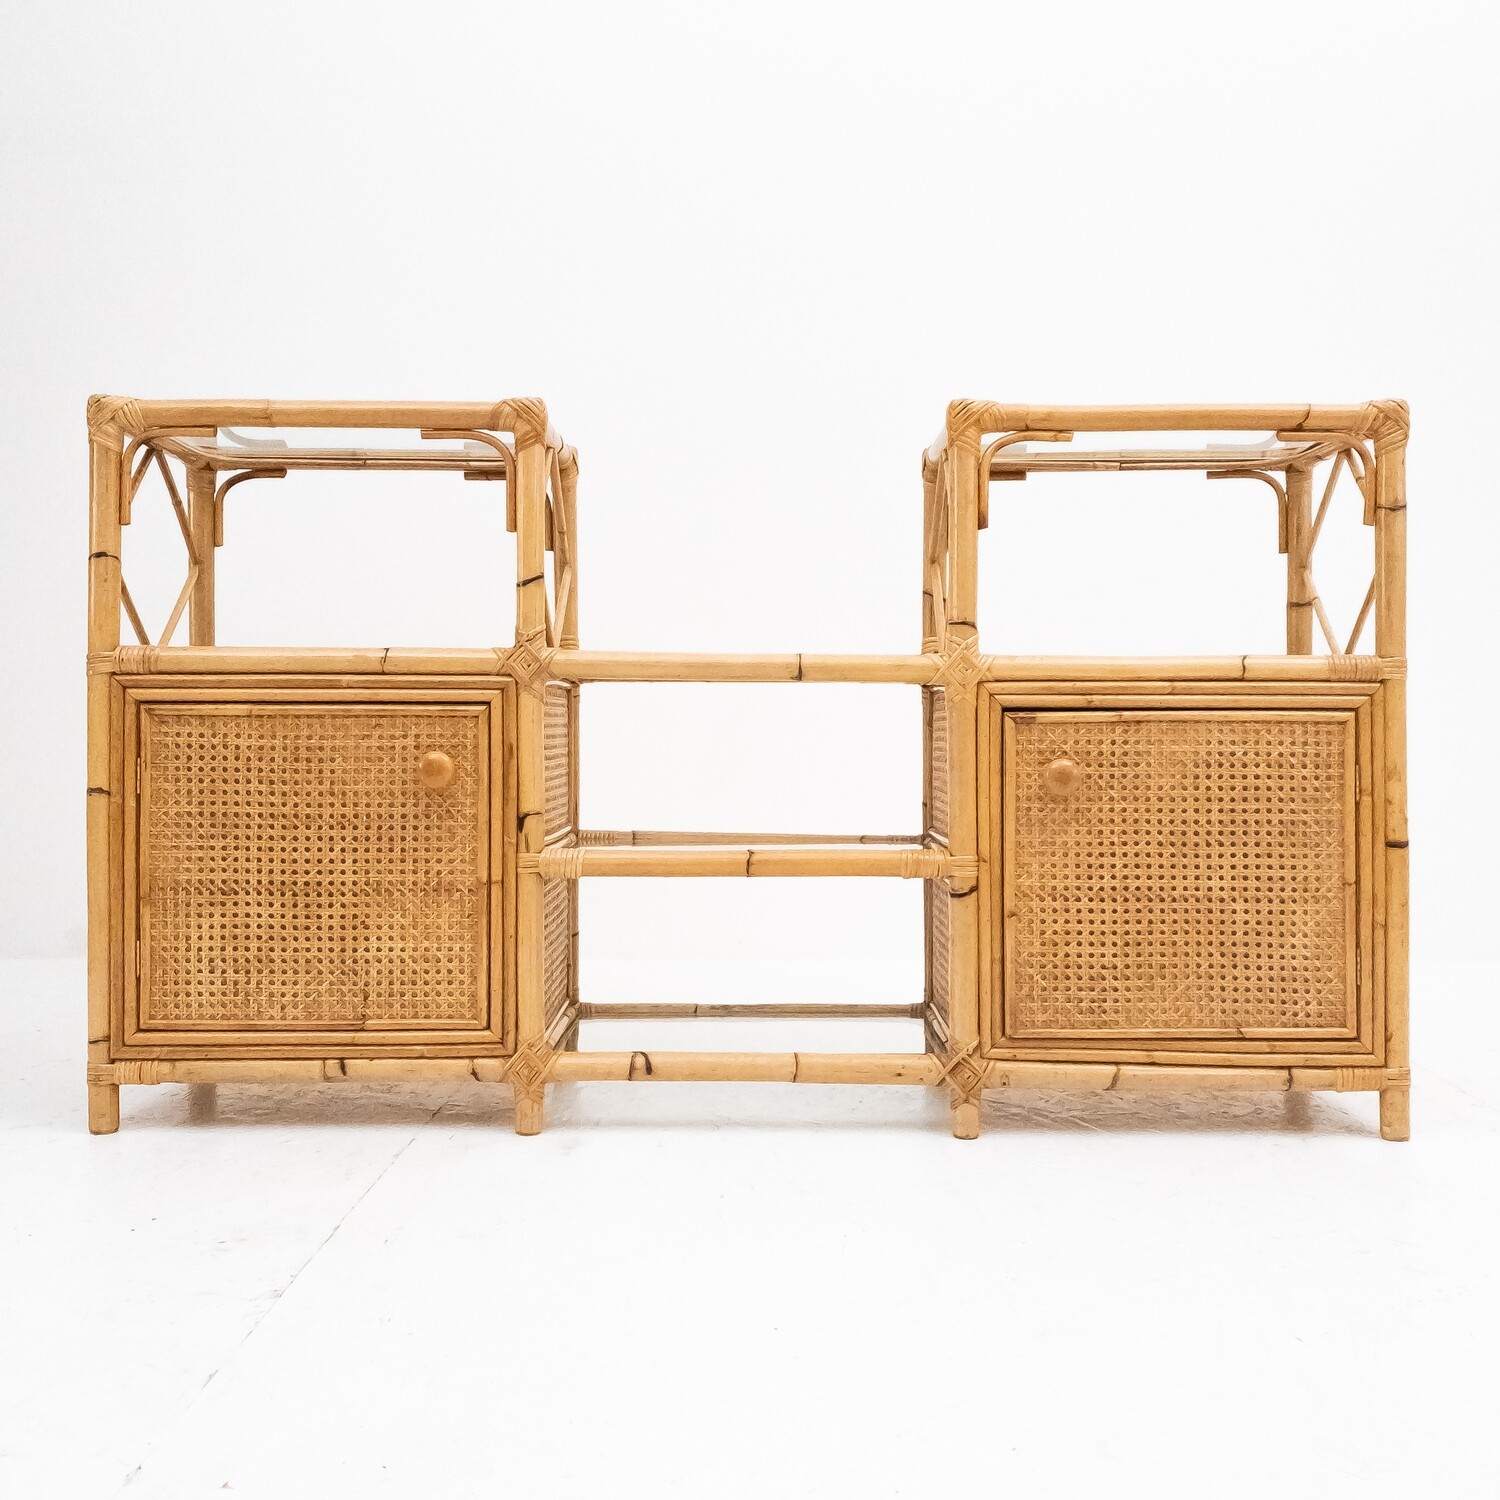 Furniture in bamboo and straw from Vienna, Italy, 1960s